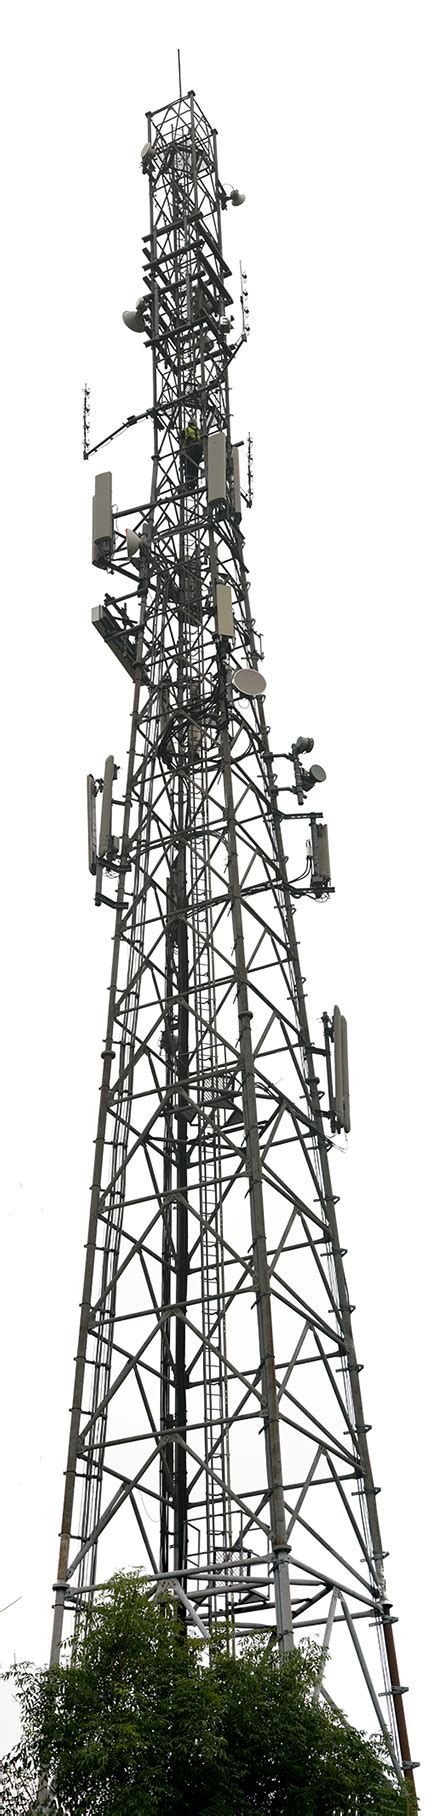 Tower clipart towers telecom, Tower towers telecom Transparent FREE for download on ...